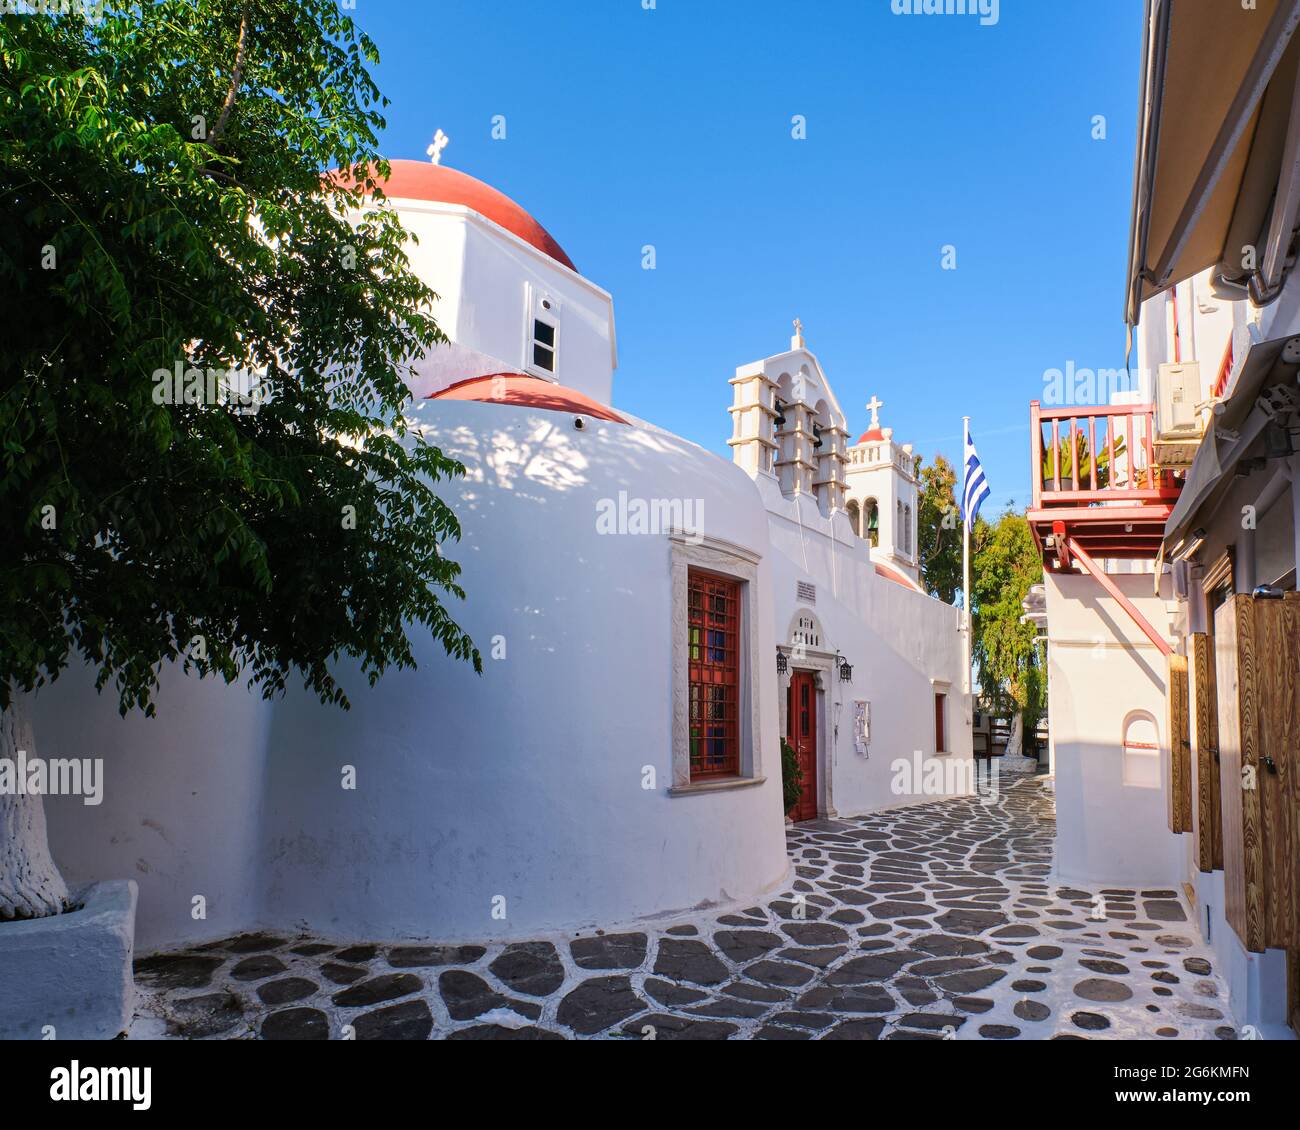 Traditional Greek Orthodox church in Greek island town. Red dome, whitewashed walls, Greek flag and bell tower. Mykonos, Cyclades, Greece. Stock Photo